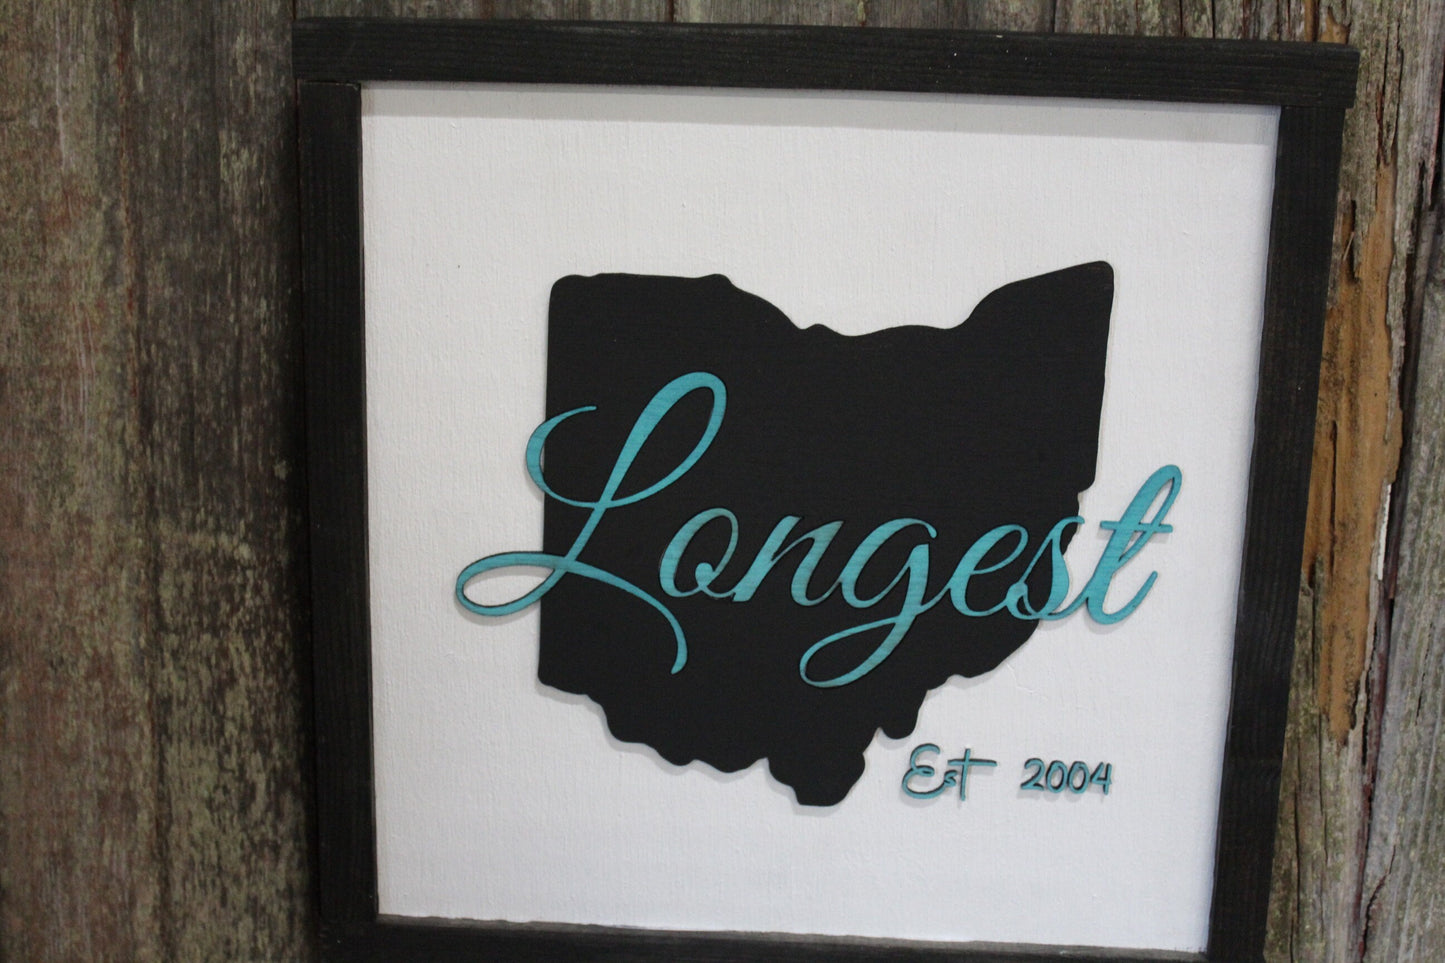 Custom State and Last Name Personalization Established Wood Sign 3D Raised Text Personalize Wedding New Home Gift Black Teal Travel Home